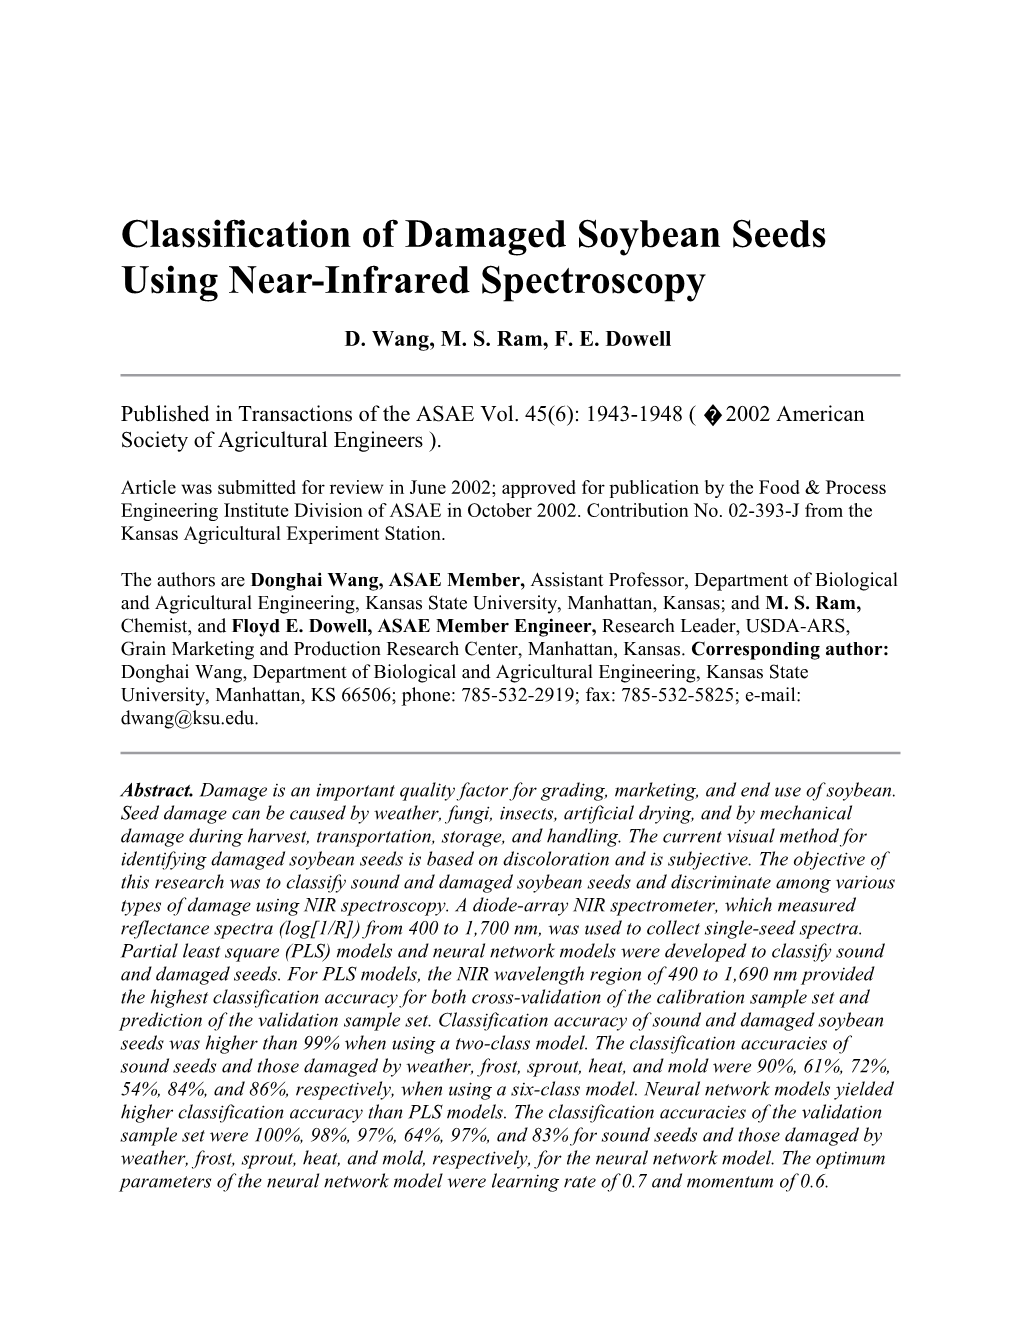 Classification of Damaged Soybean Seeds Using Near-Infrared Spectroscopy